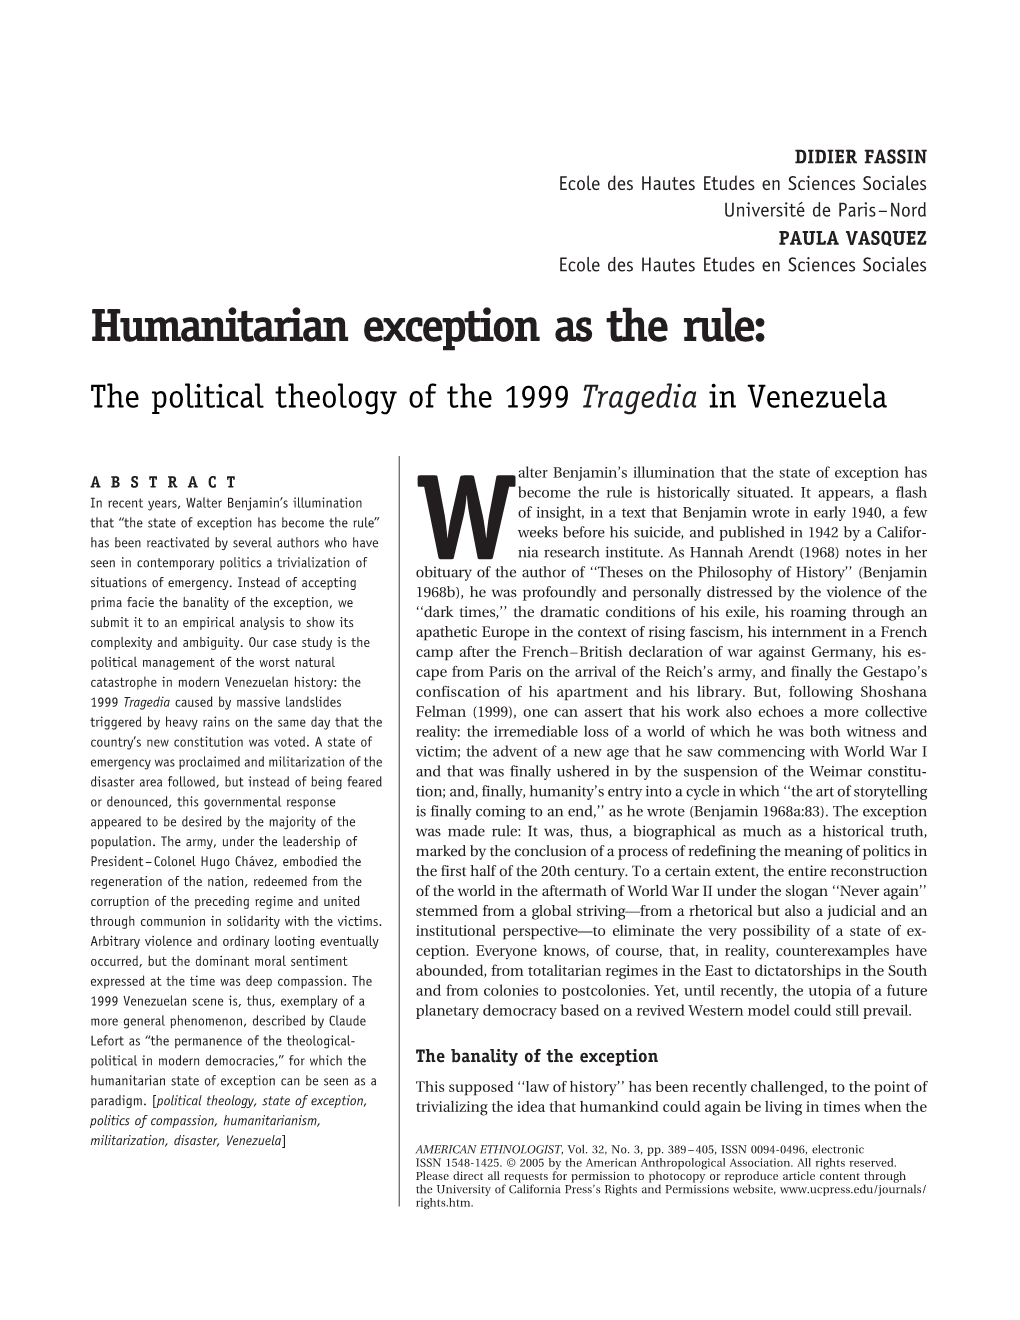 Humanitarian Exception As the Rule: the Political Theology of the 1999 Tragedia in Venezuela